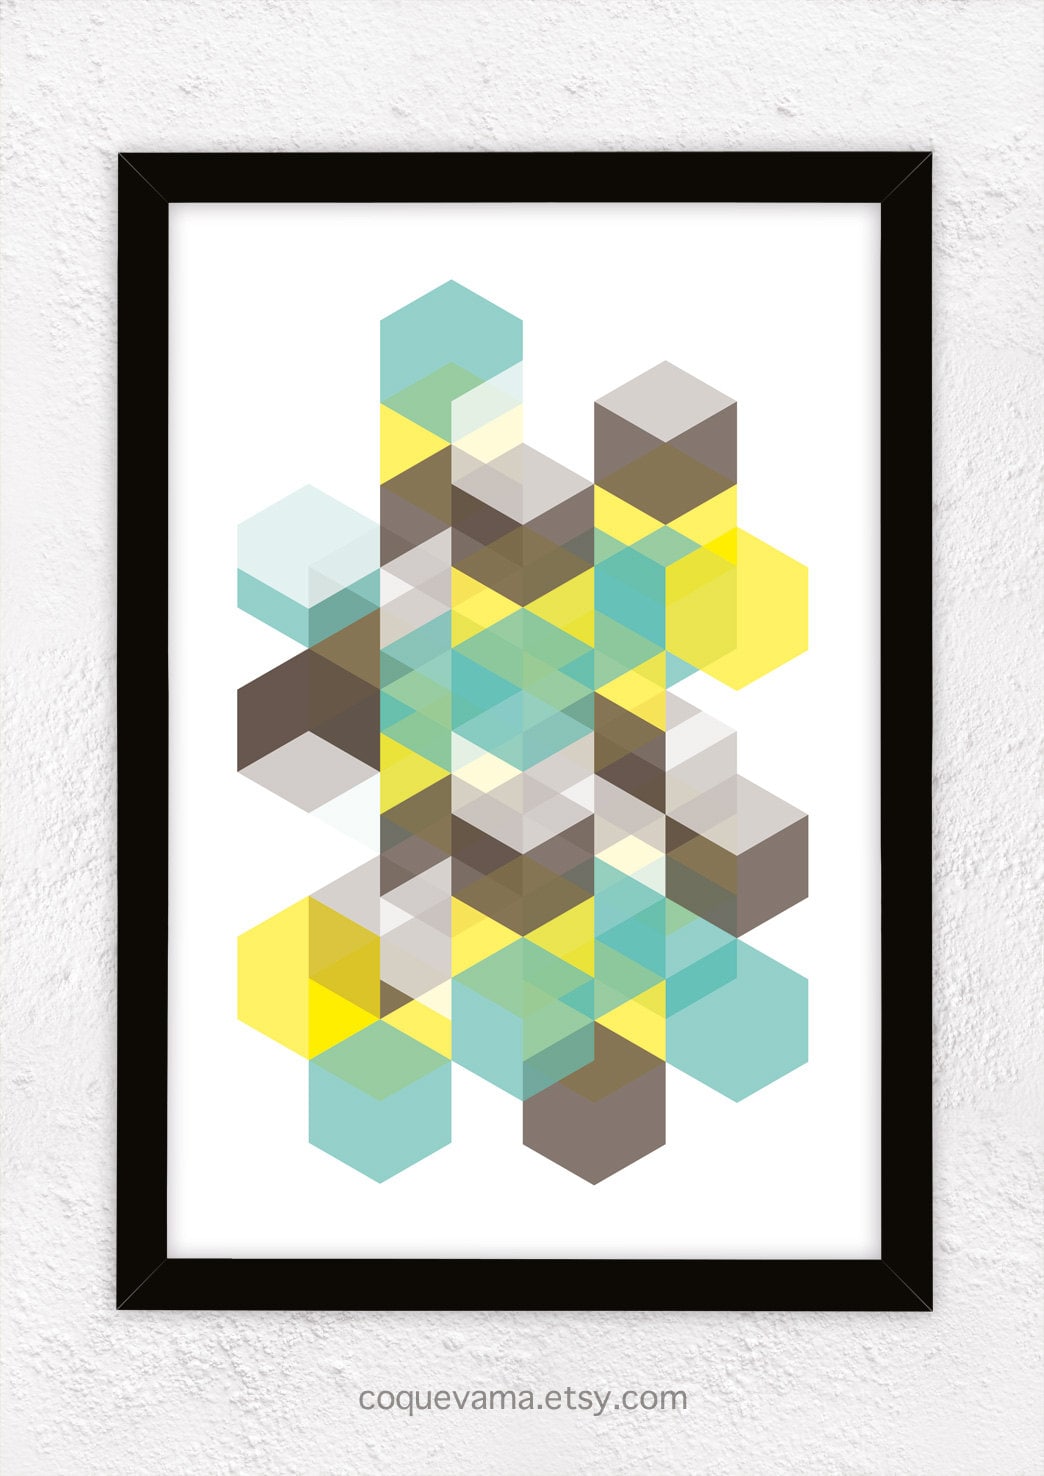 Art Print , A3, Poster, Hexagons - Yellow, Brown and Mint - Coquevama